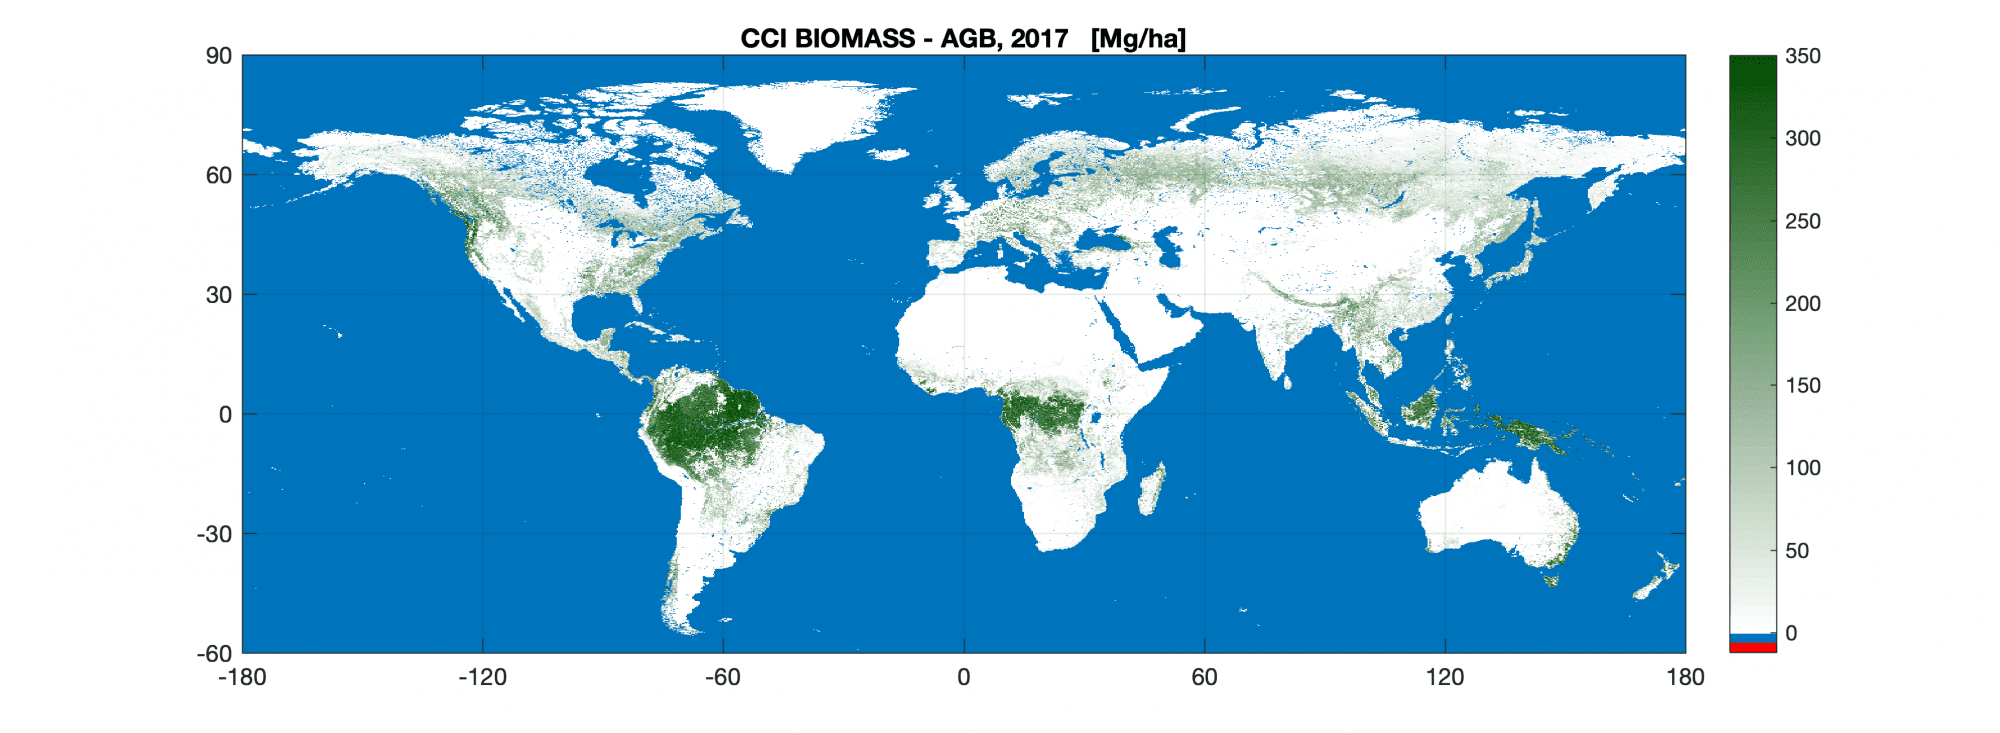 New Biomass Map to Take Stock of World's Carbon